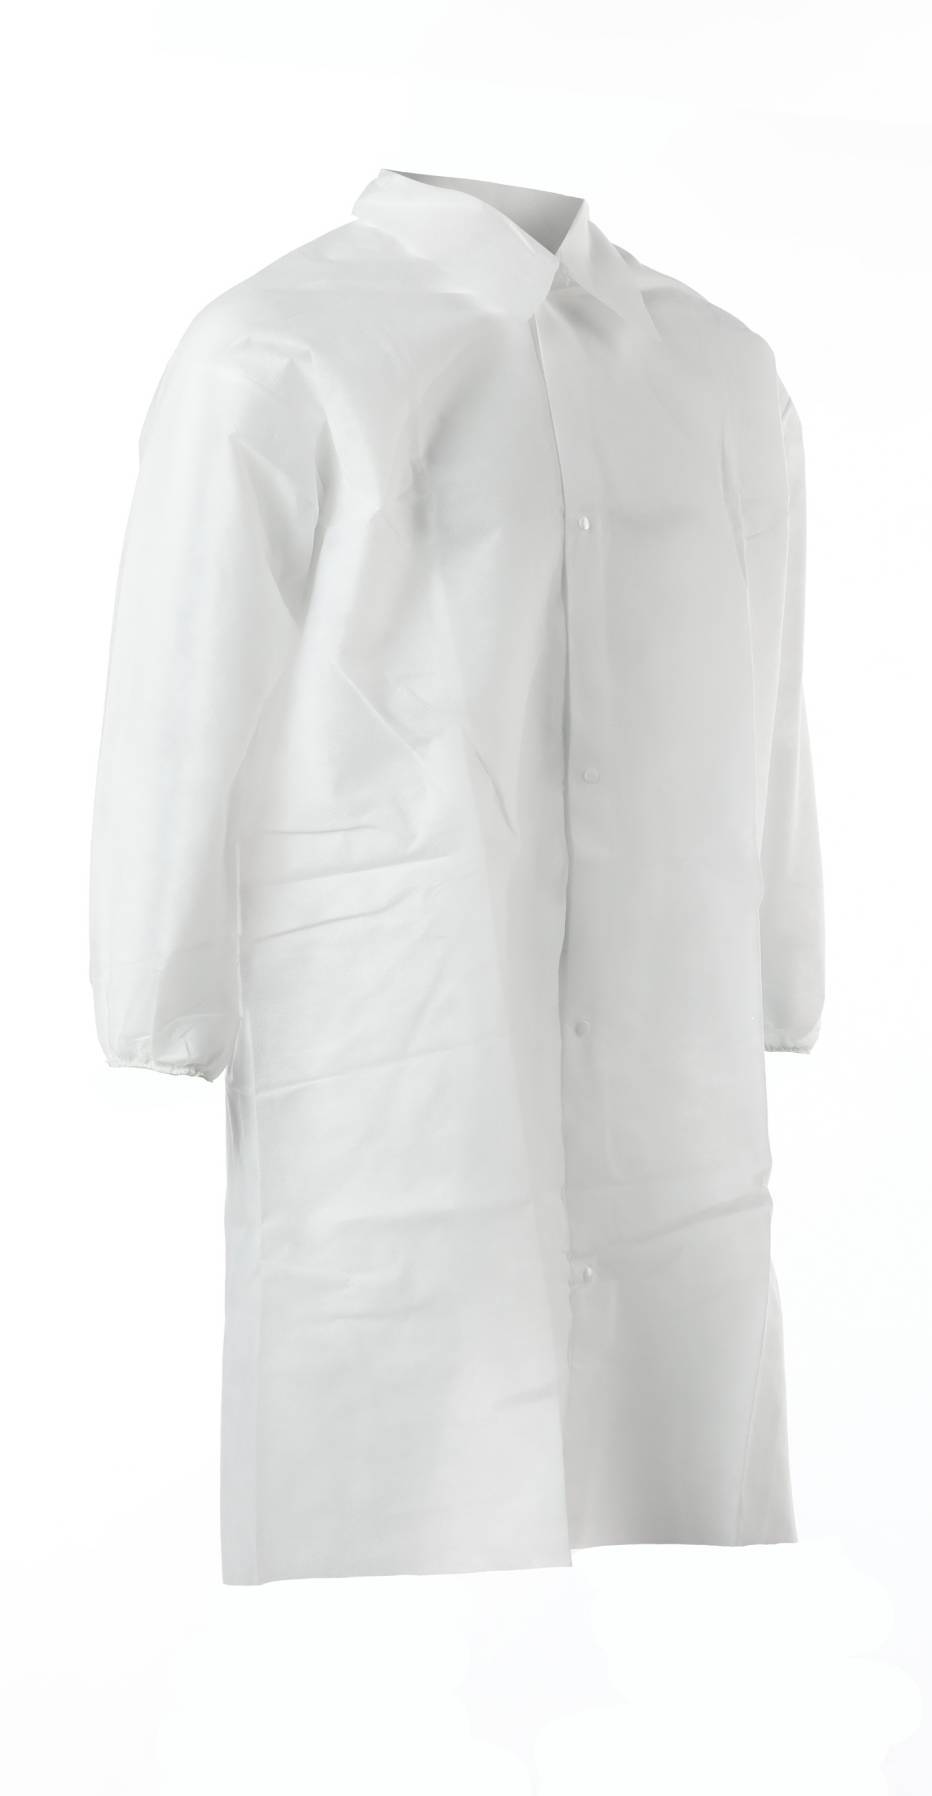 LC-J2621 Alpha Protech® ComforTech® Lab Coats with 3 Pockets